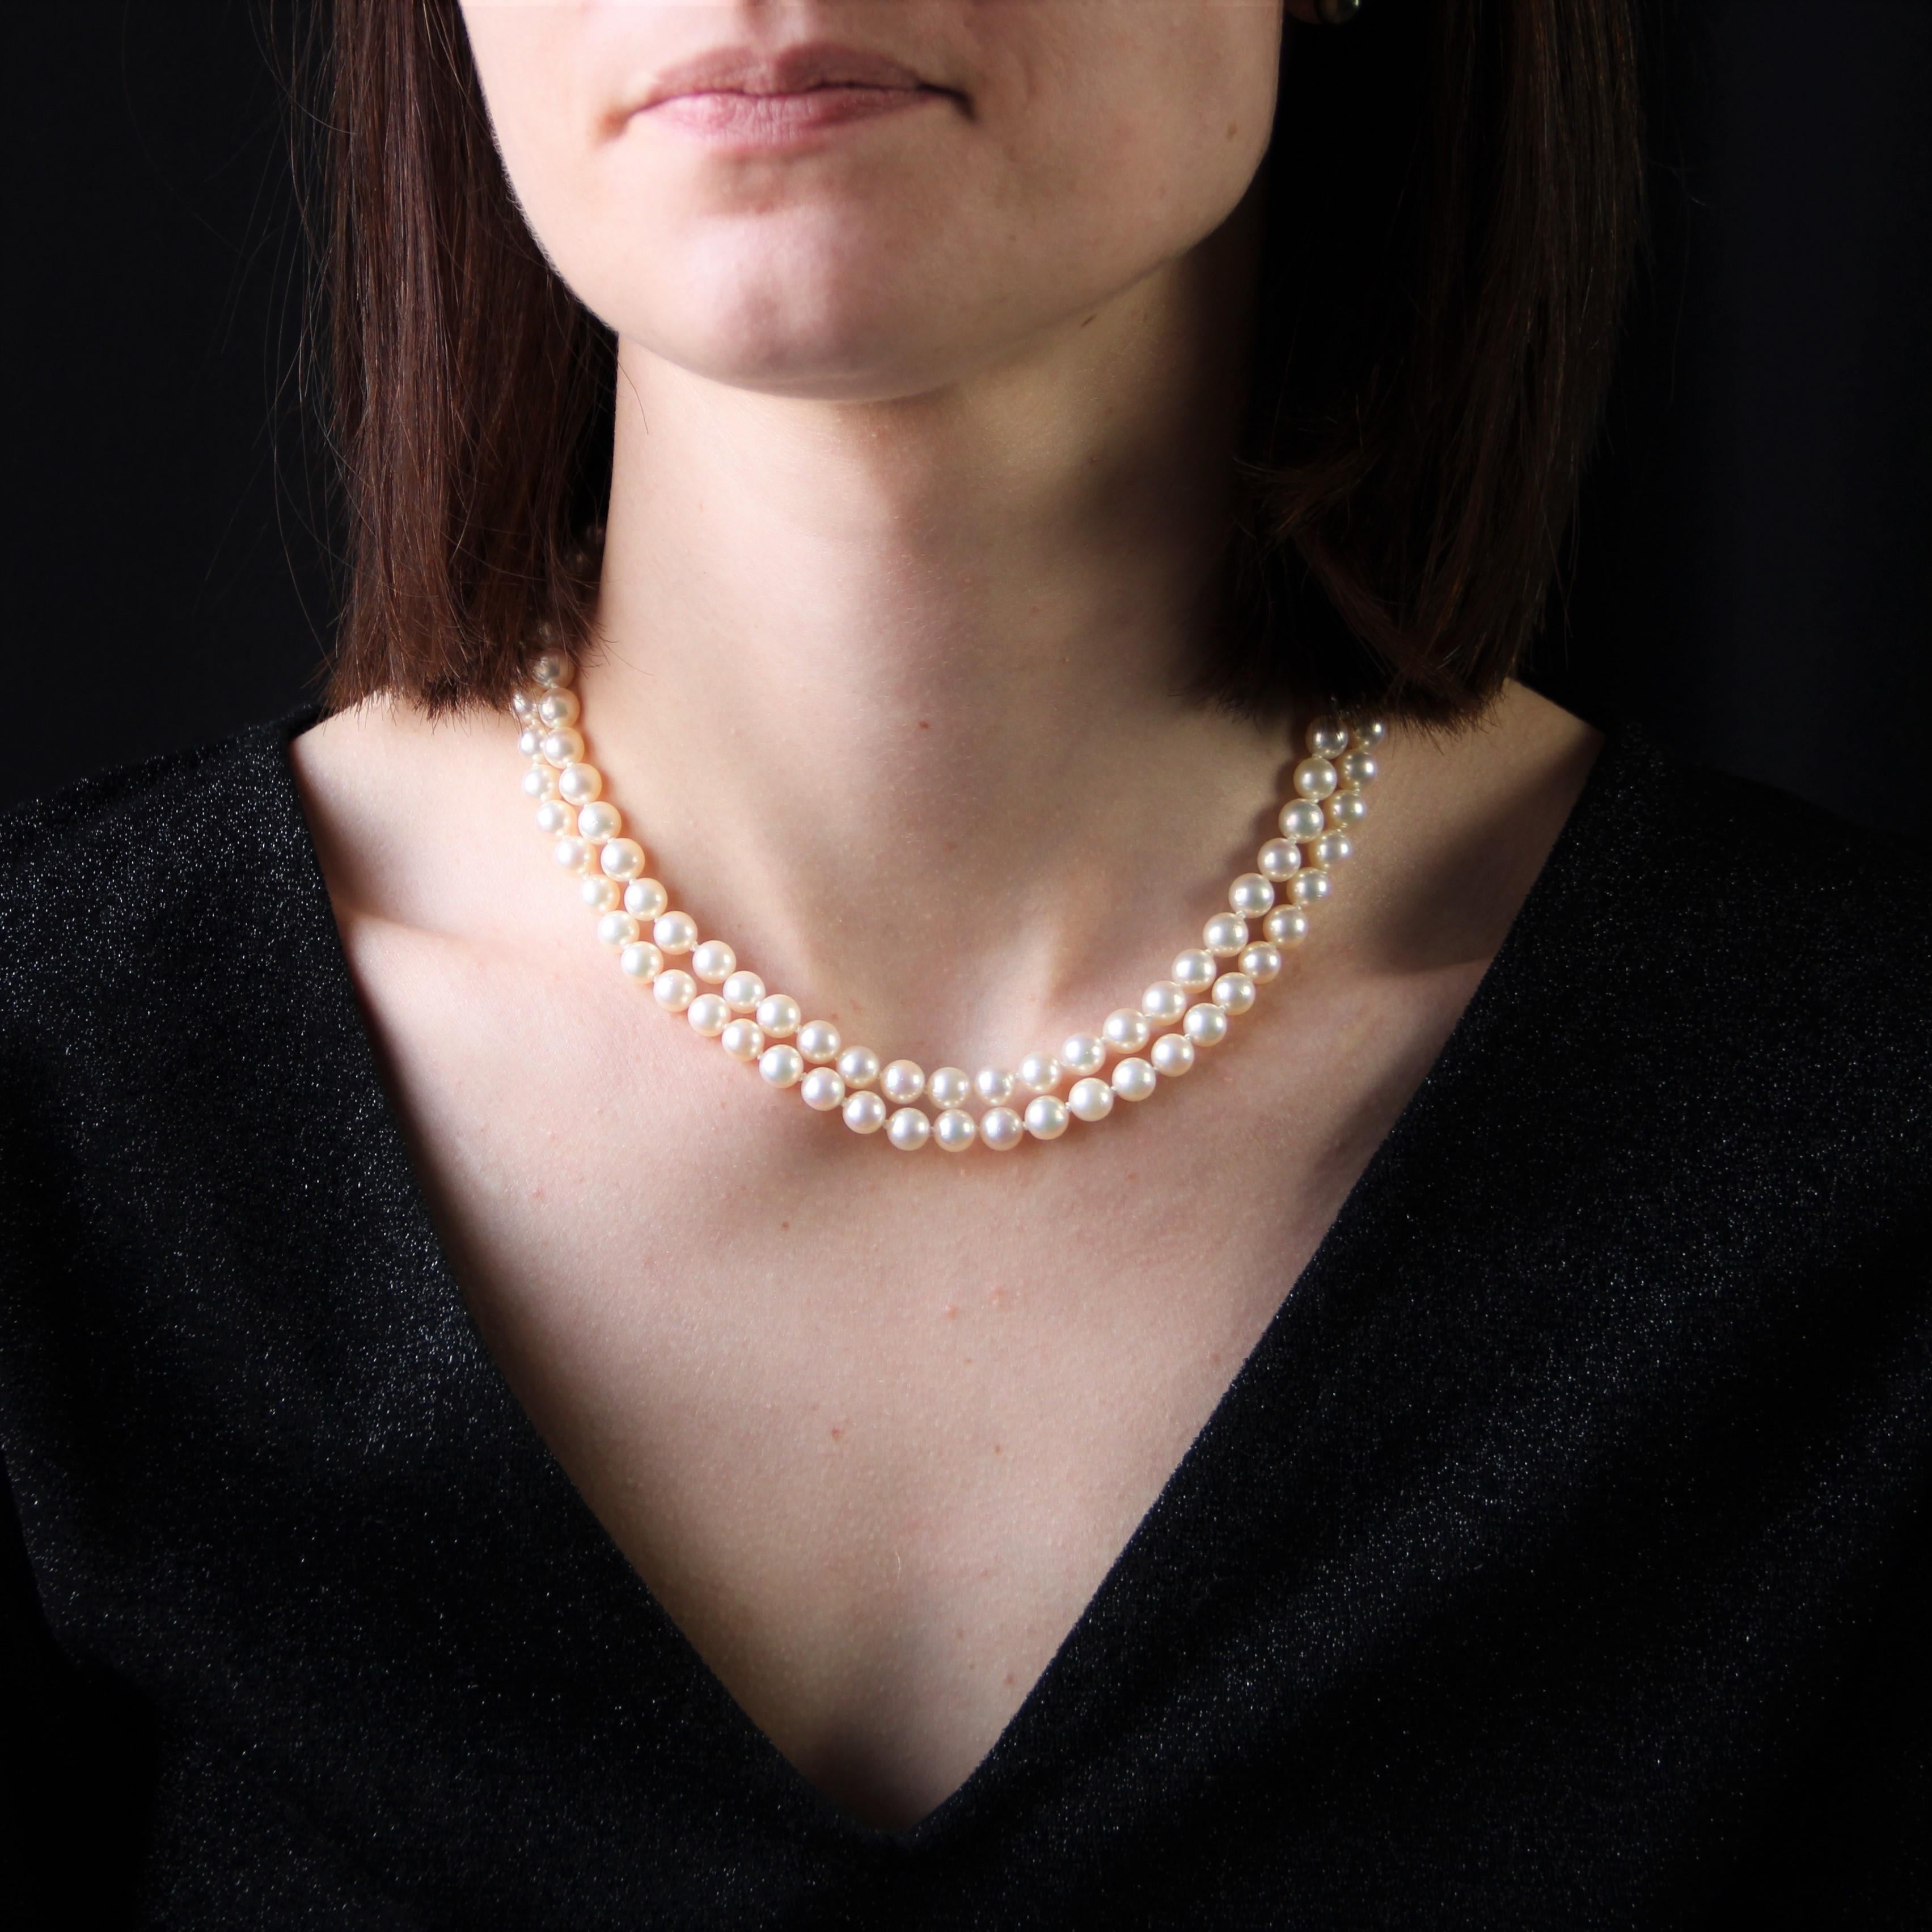 Retro necklace made up of 2 rows of pearly white cultured pearls in choker of identical size.
The clasp is in 14 karat yellow gold. It is openworked and decorated with 4 gold leaves and 5 cultured pearls. It is ratchet with safety 